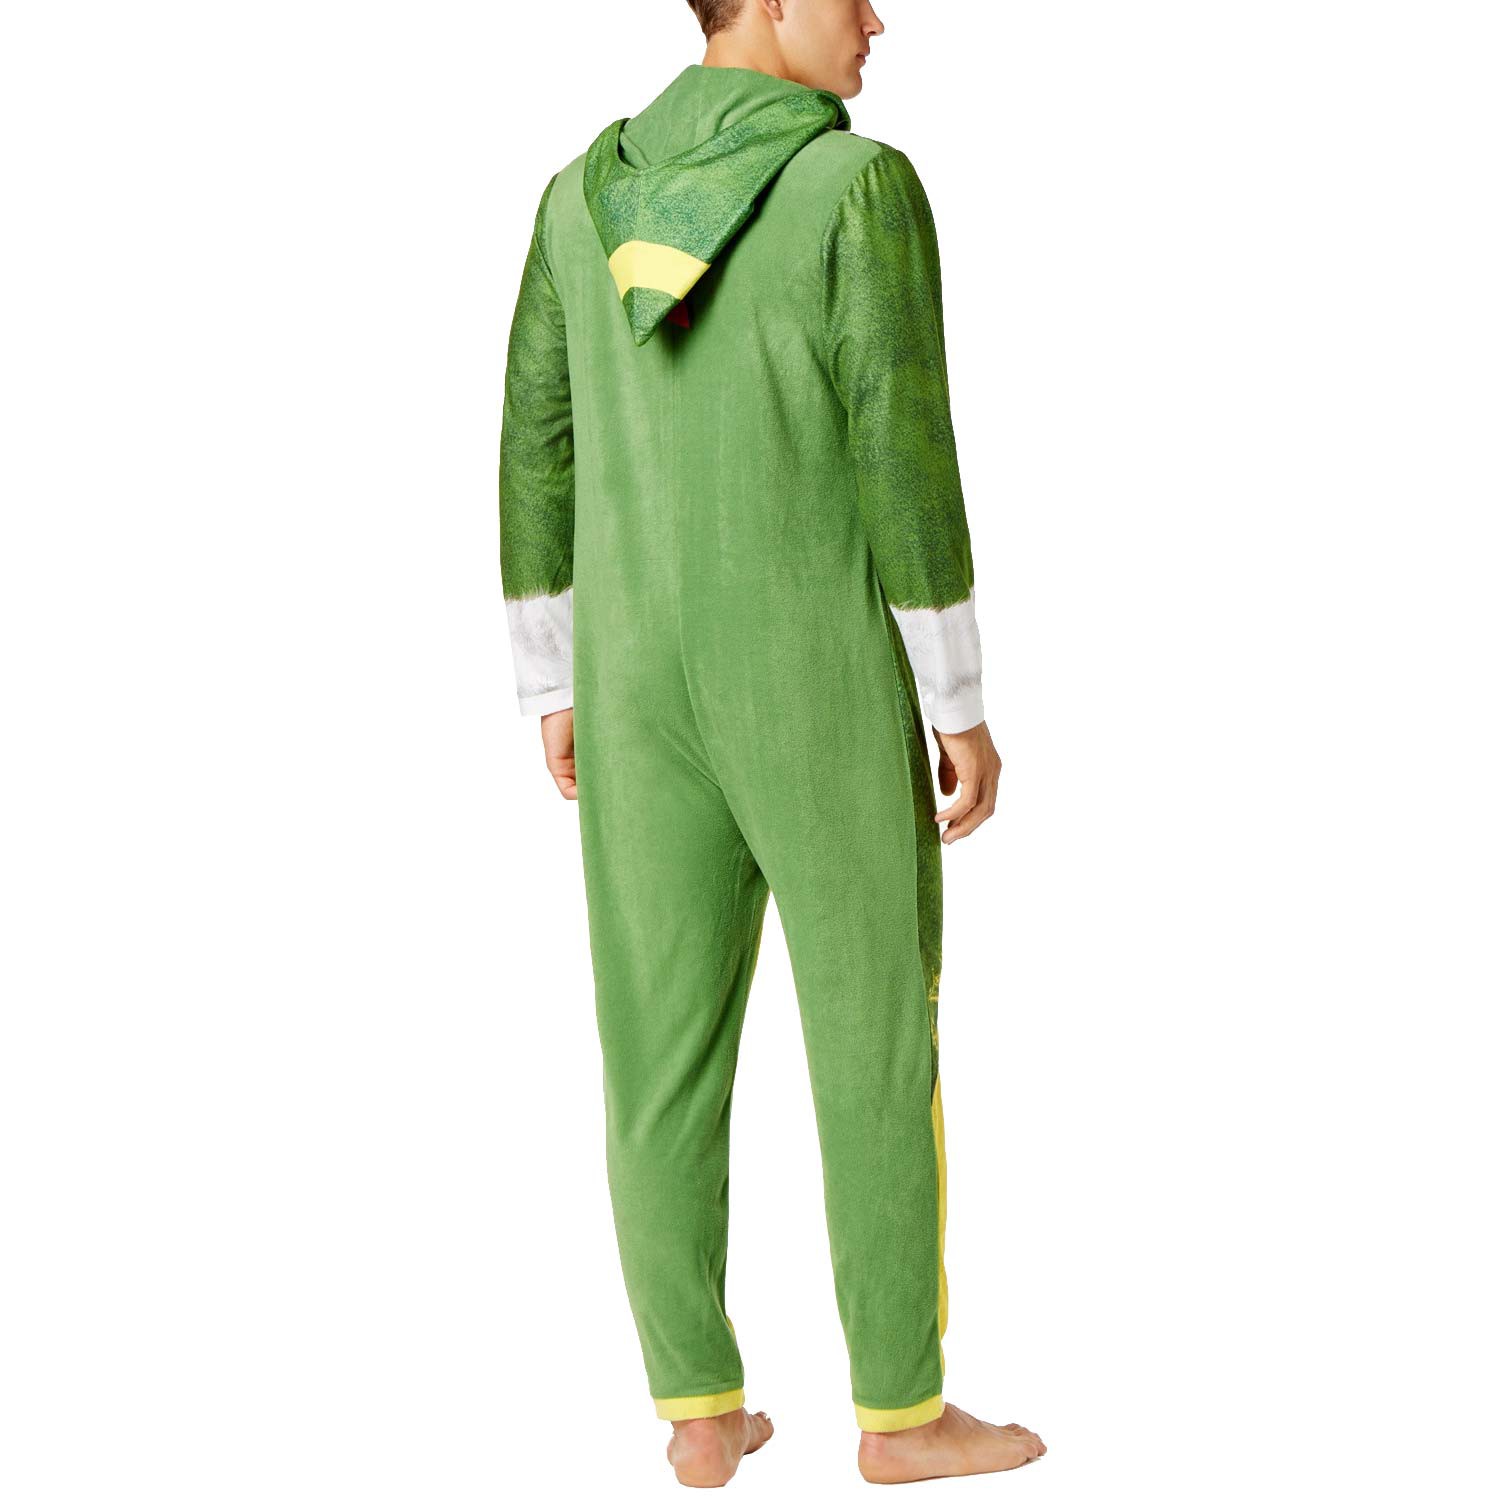 Elf Movie Green And Yellow Union Suit